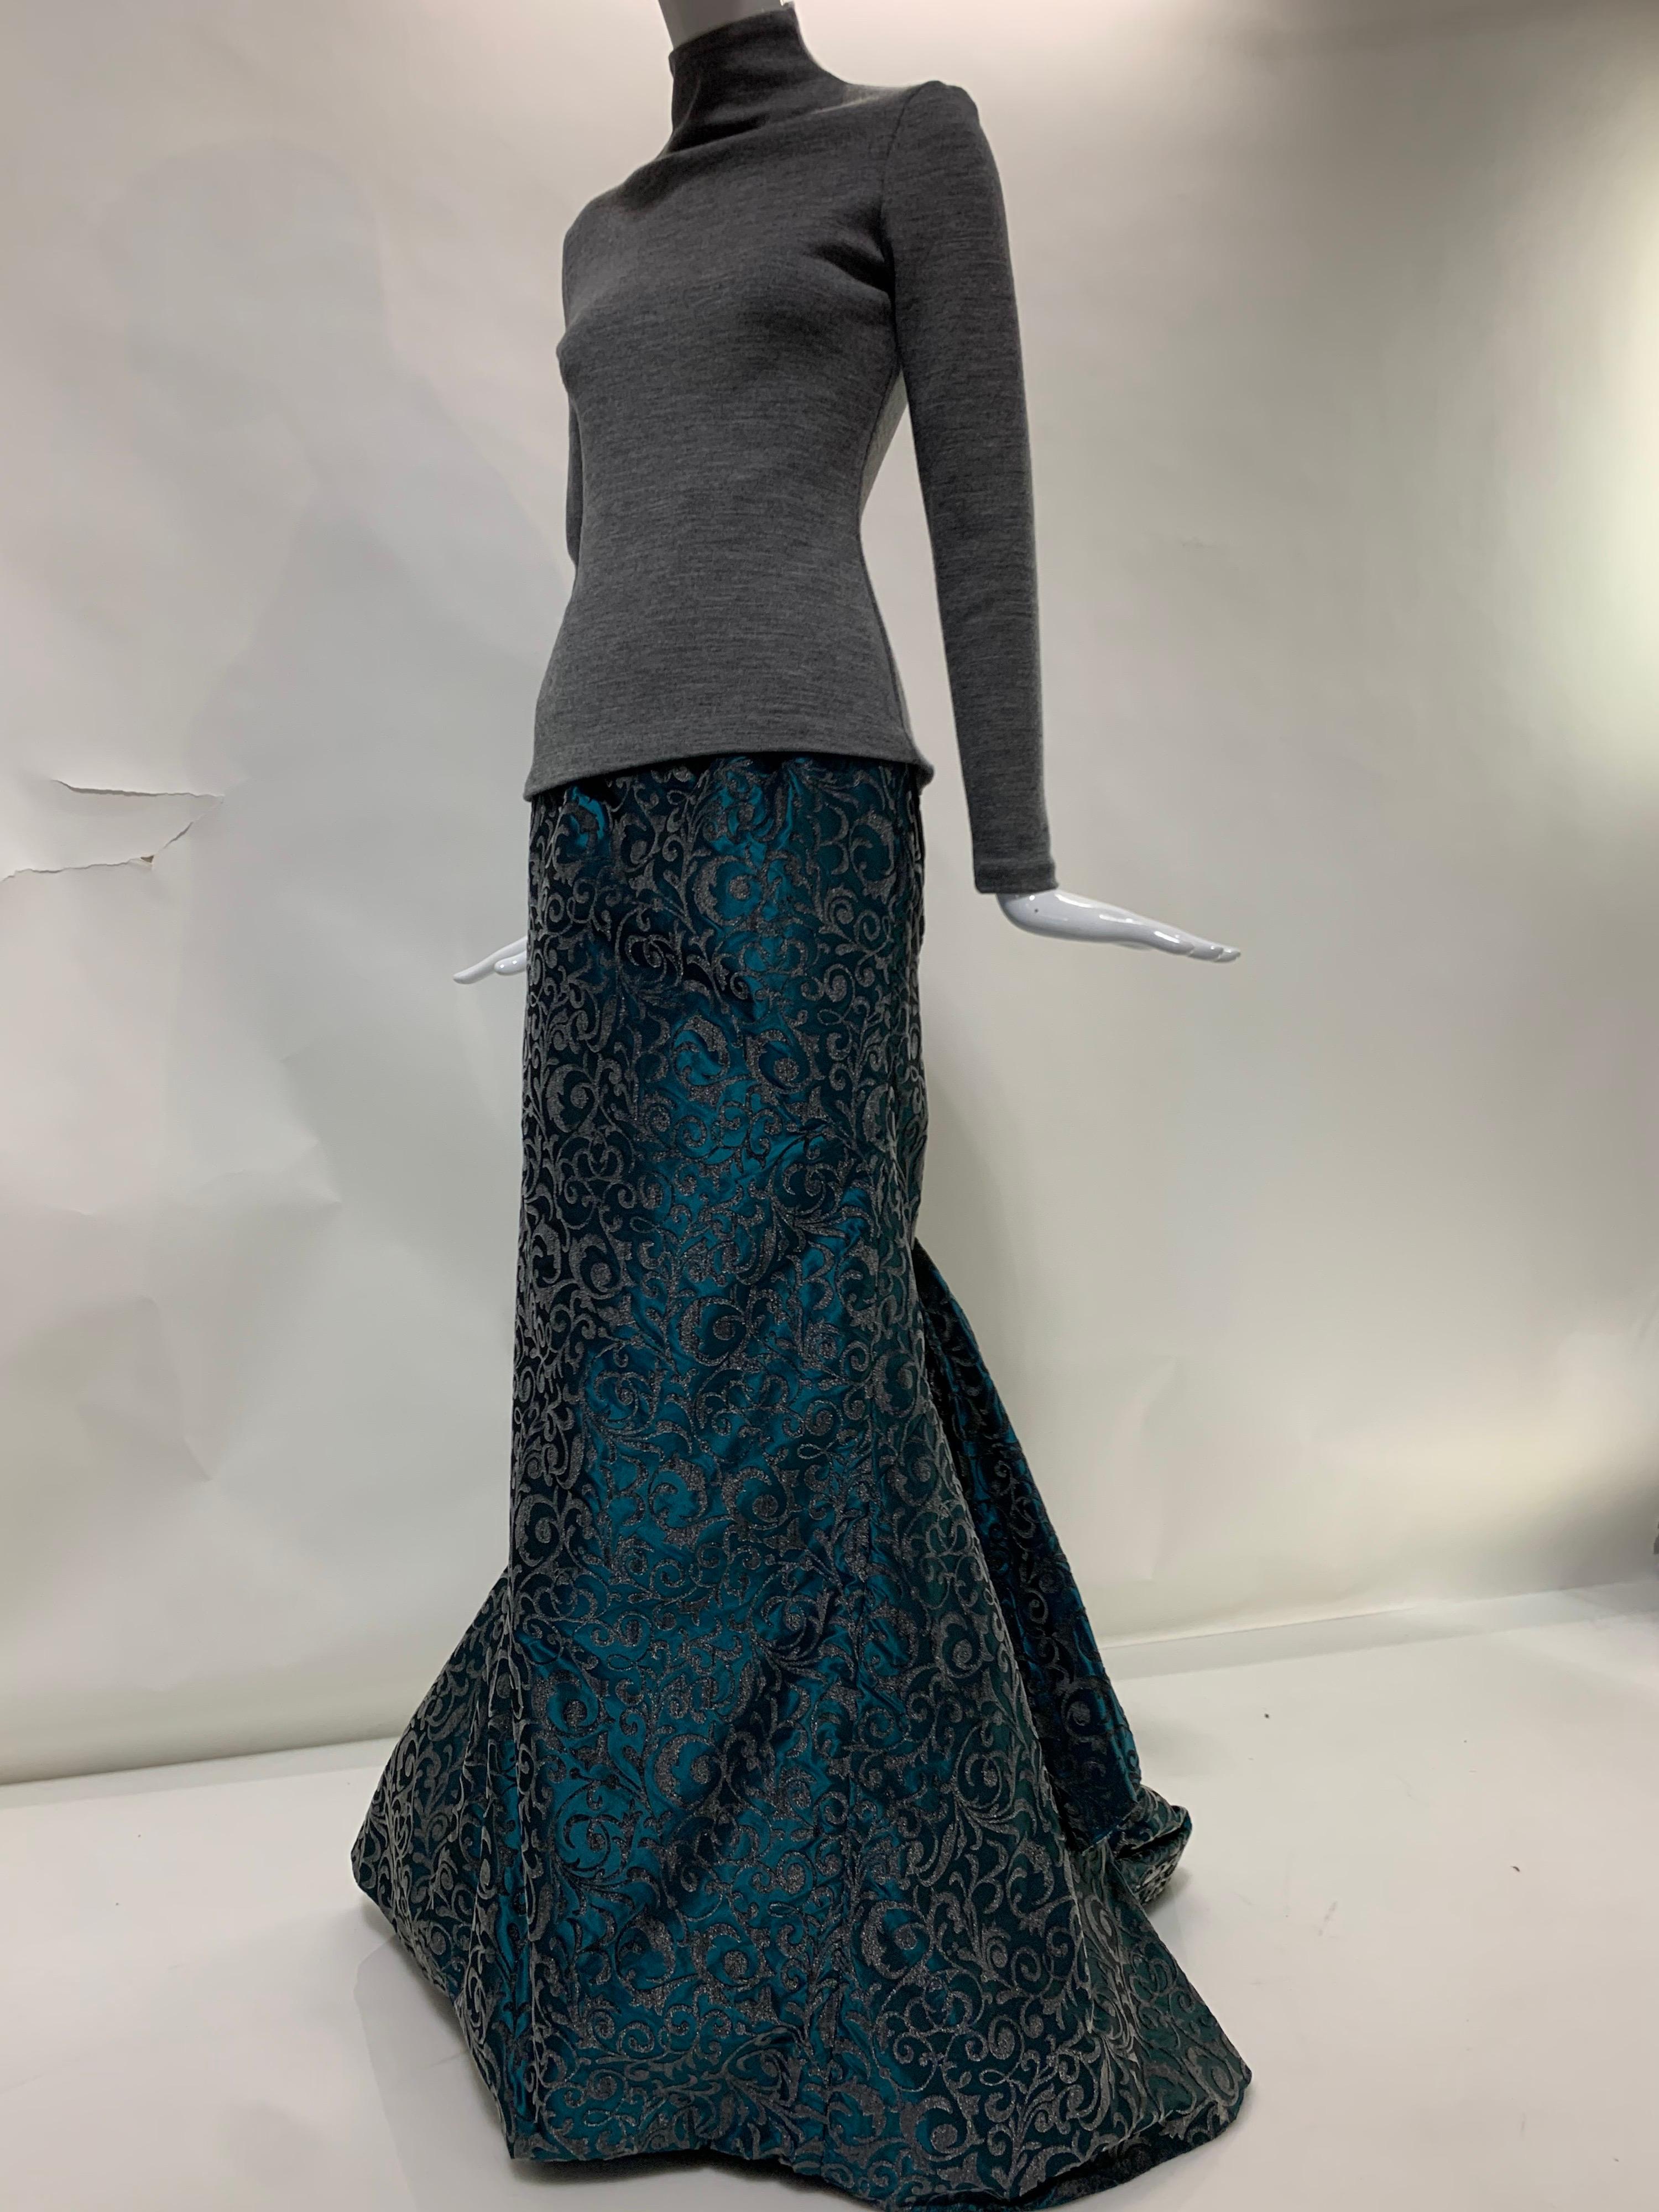 1990s Michael Casey Couture 2-piece ensemble consisting of a grey high neck knit sweater with long sleeves and back zipper and a floral flocked teal silk taffeta formal skirt, caught up in a low bubble train at the back of the knees and supported by